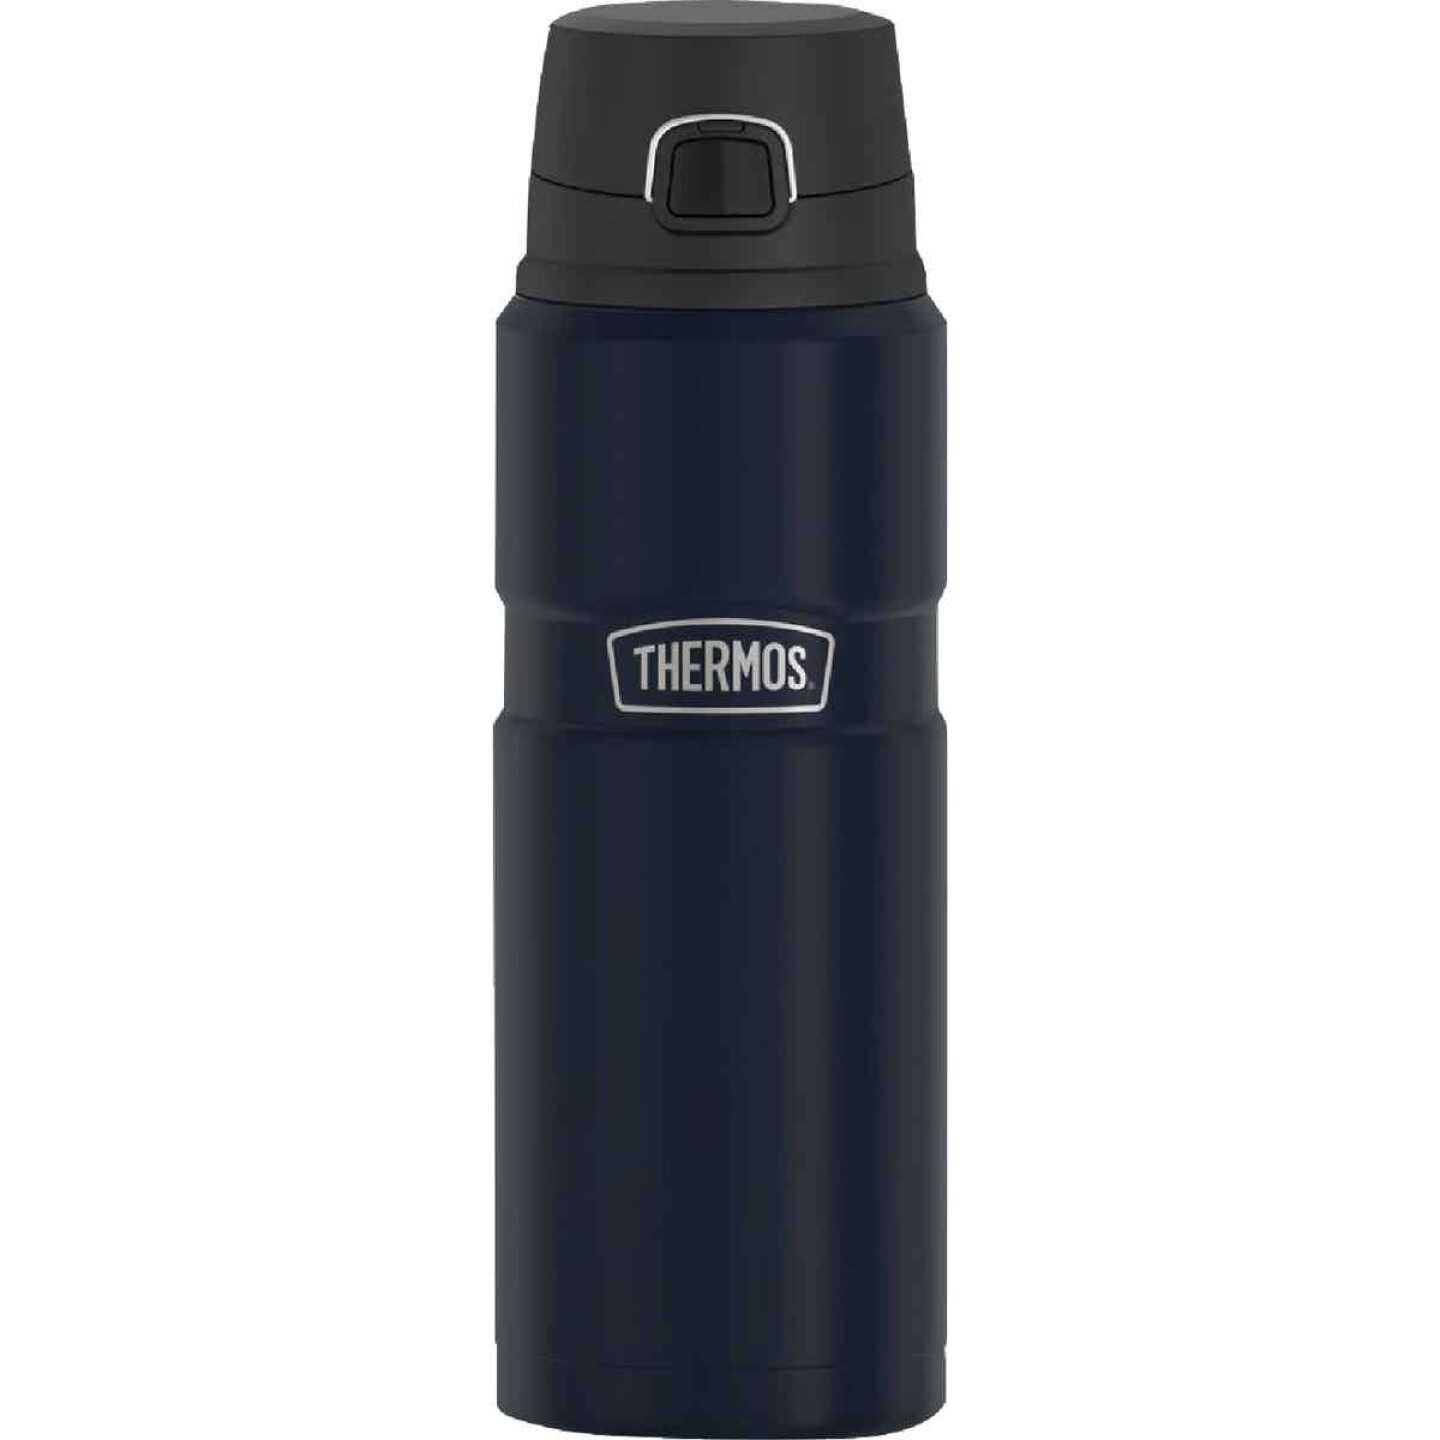 Thermos Stainless King 24 Oz. Matte Blue Stainless Steel Drink Bottle -  Wood Shed Lumber & Hardware Supply